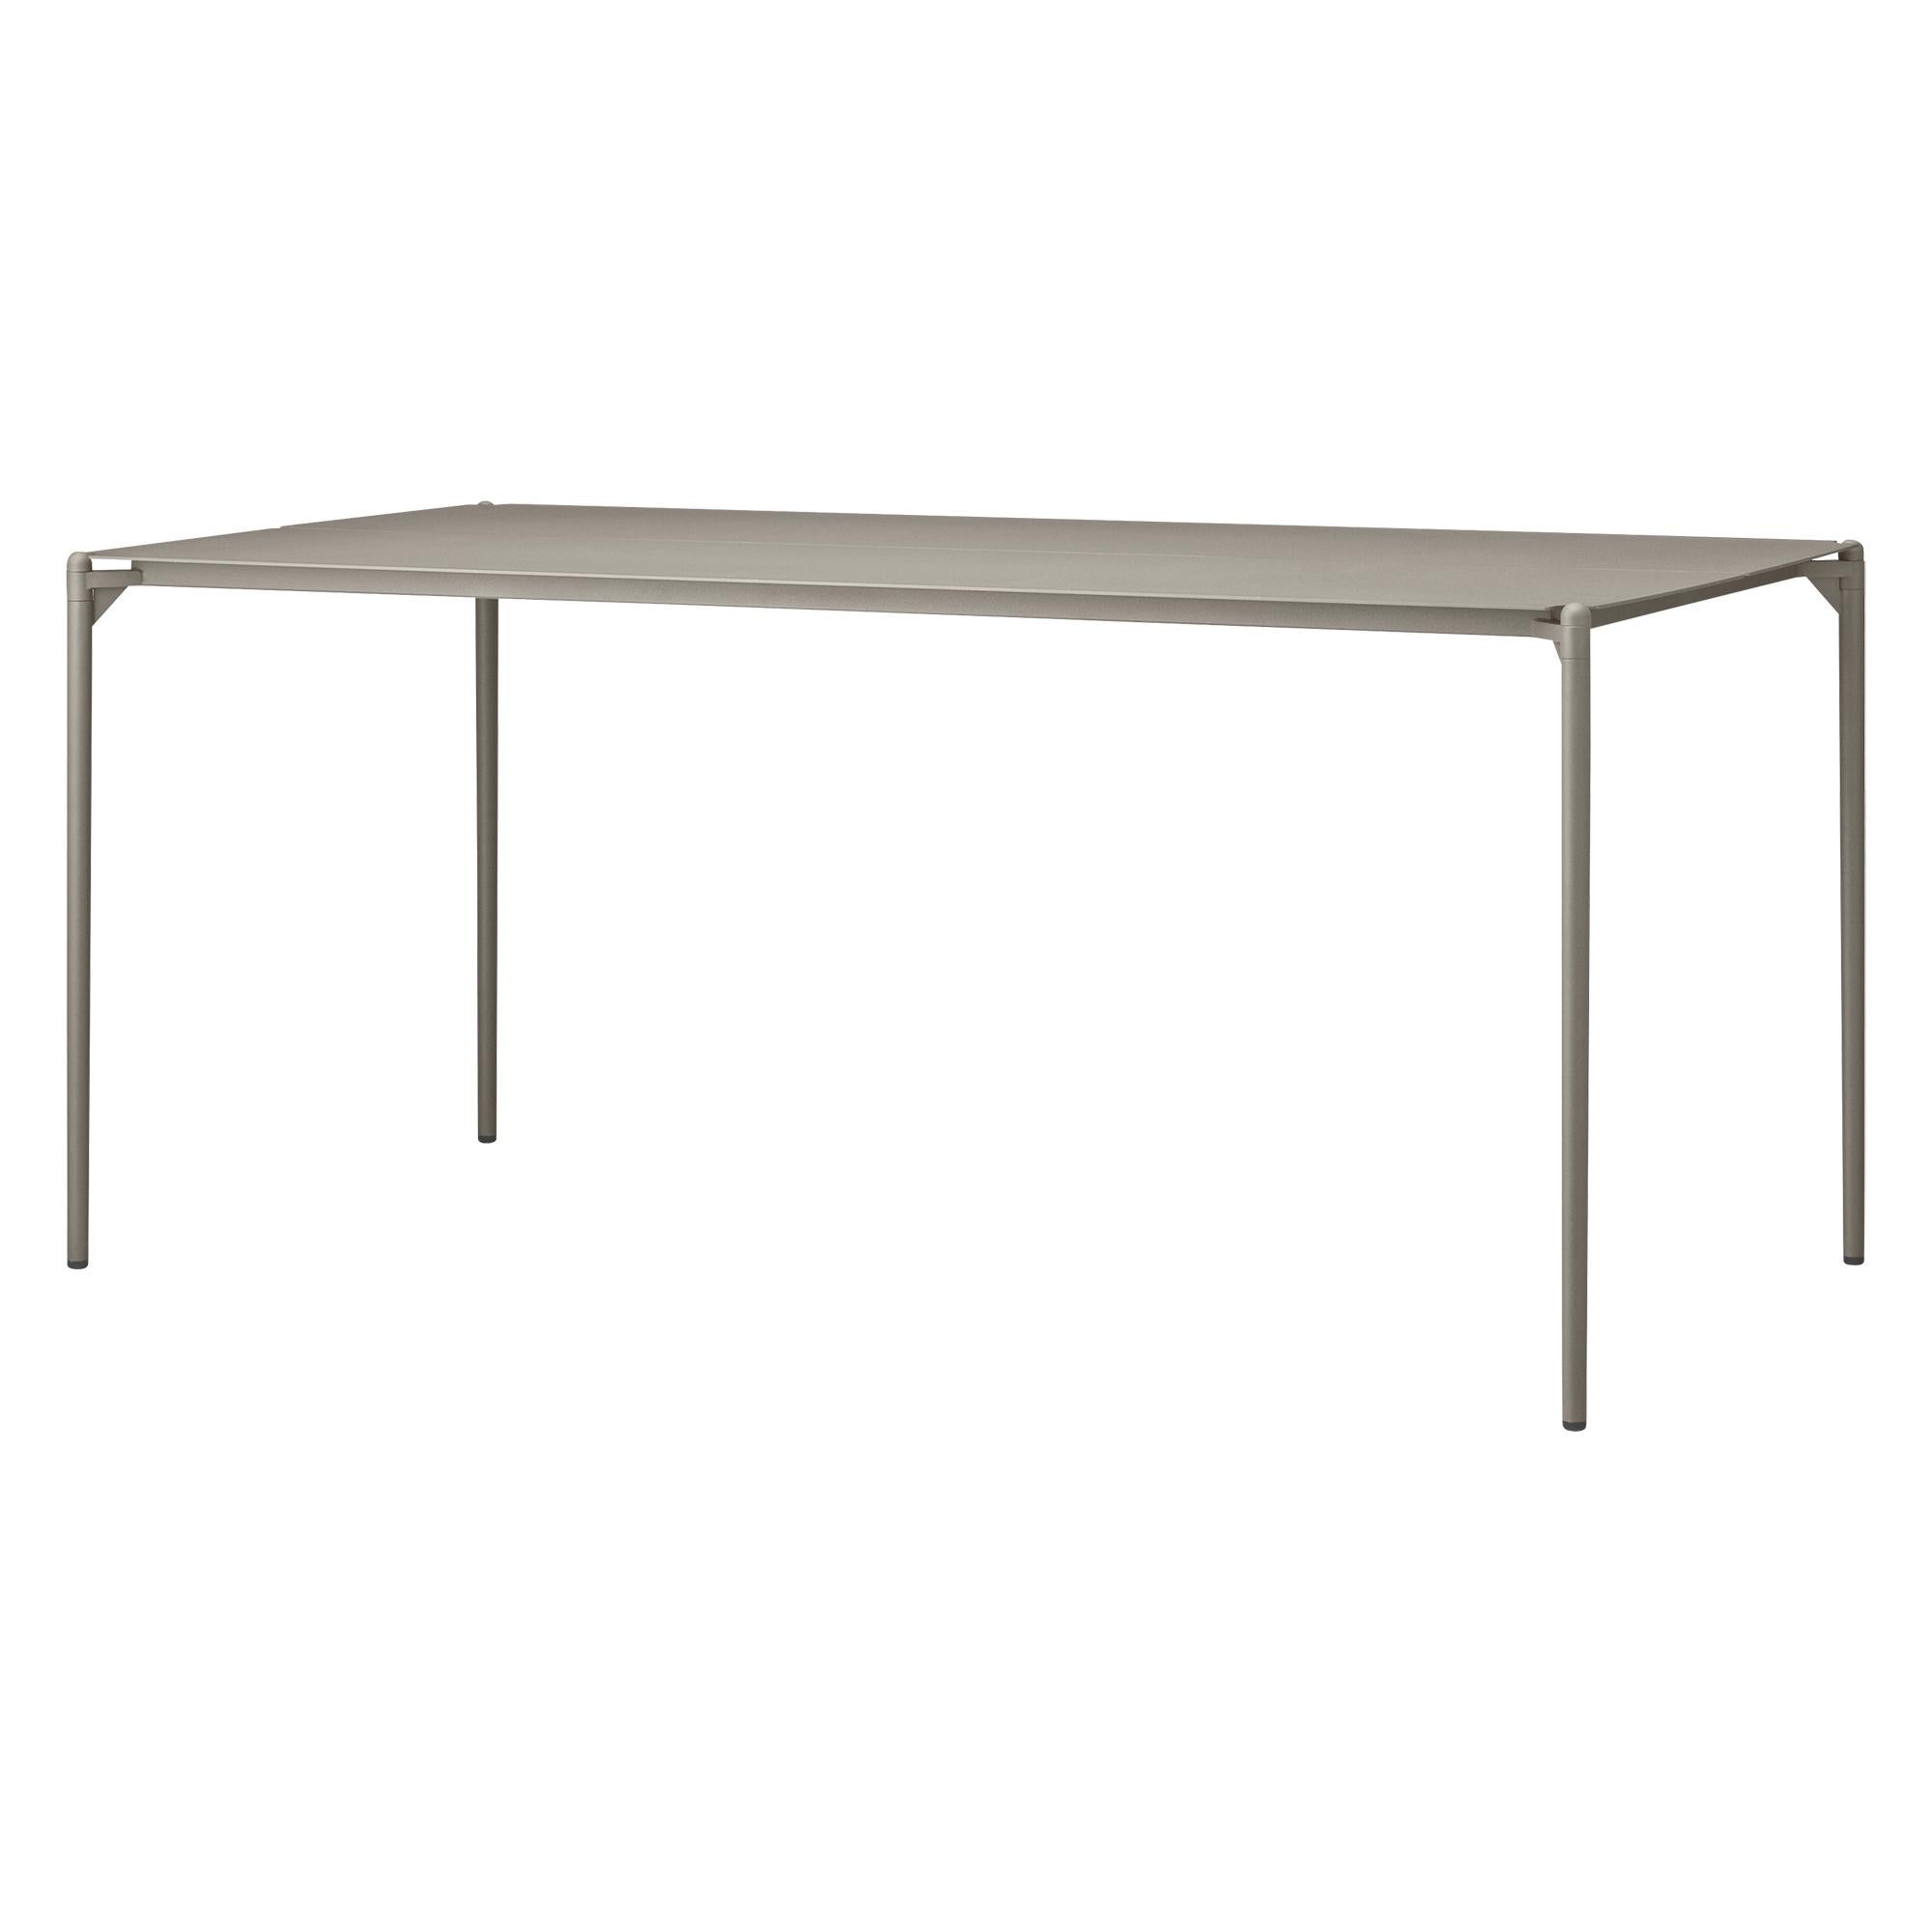 Medium Taupe Minimalist table
Dimensions: D 160 x W 80 x H 72 cm 
Materials: Steel w. matte powder coating & aluminum w. matte powder coating.
Available in colors: Taupe, Bordeaux, forest, ginger bread, black and, black and gold. 


Bring